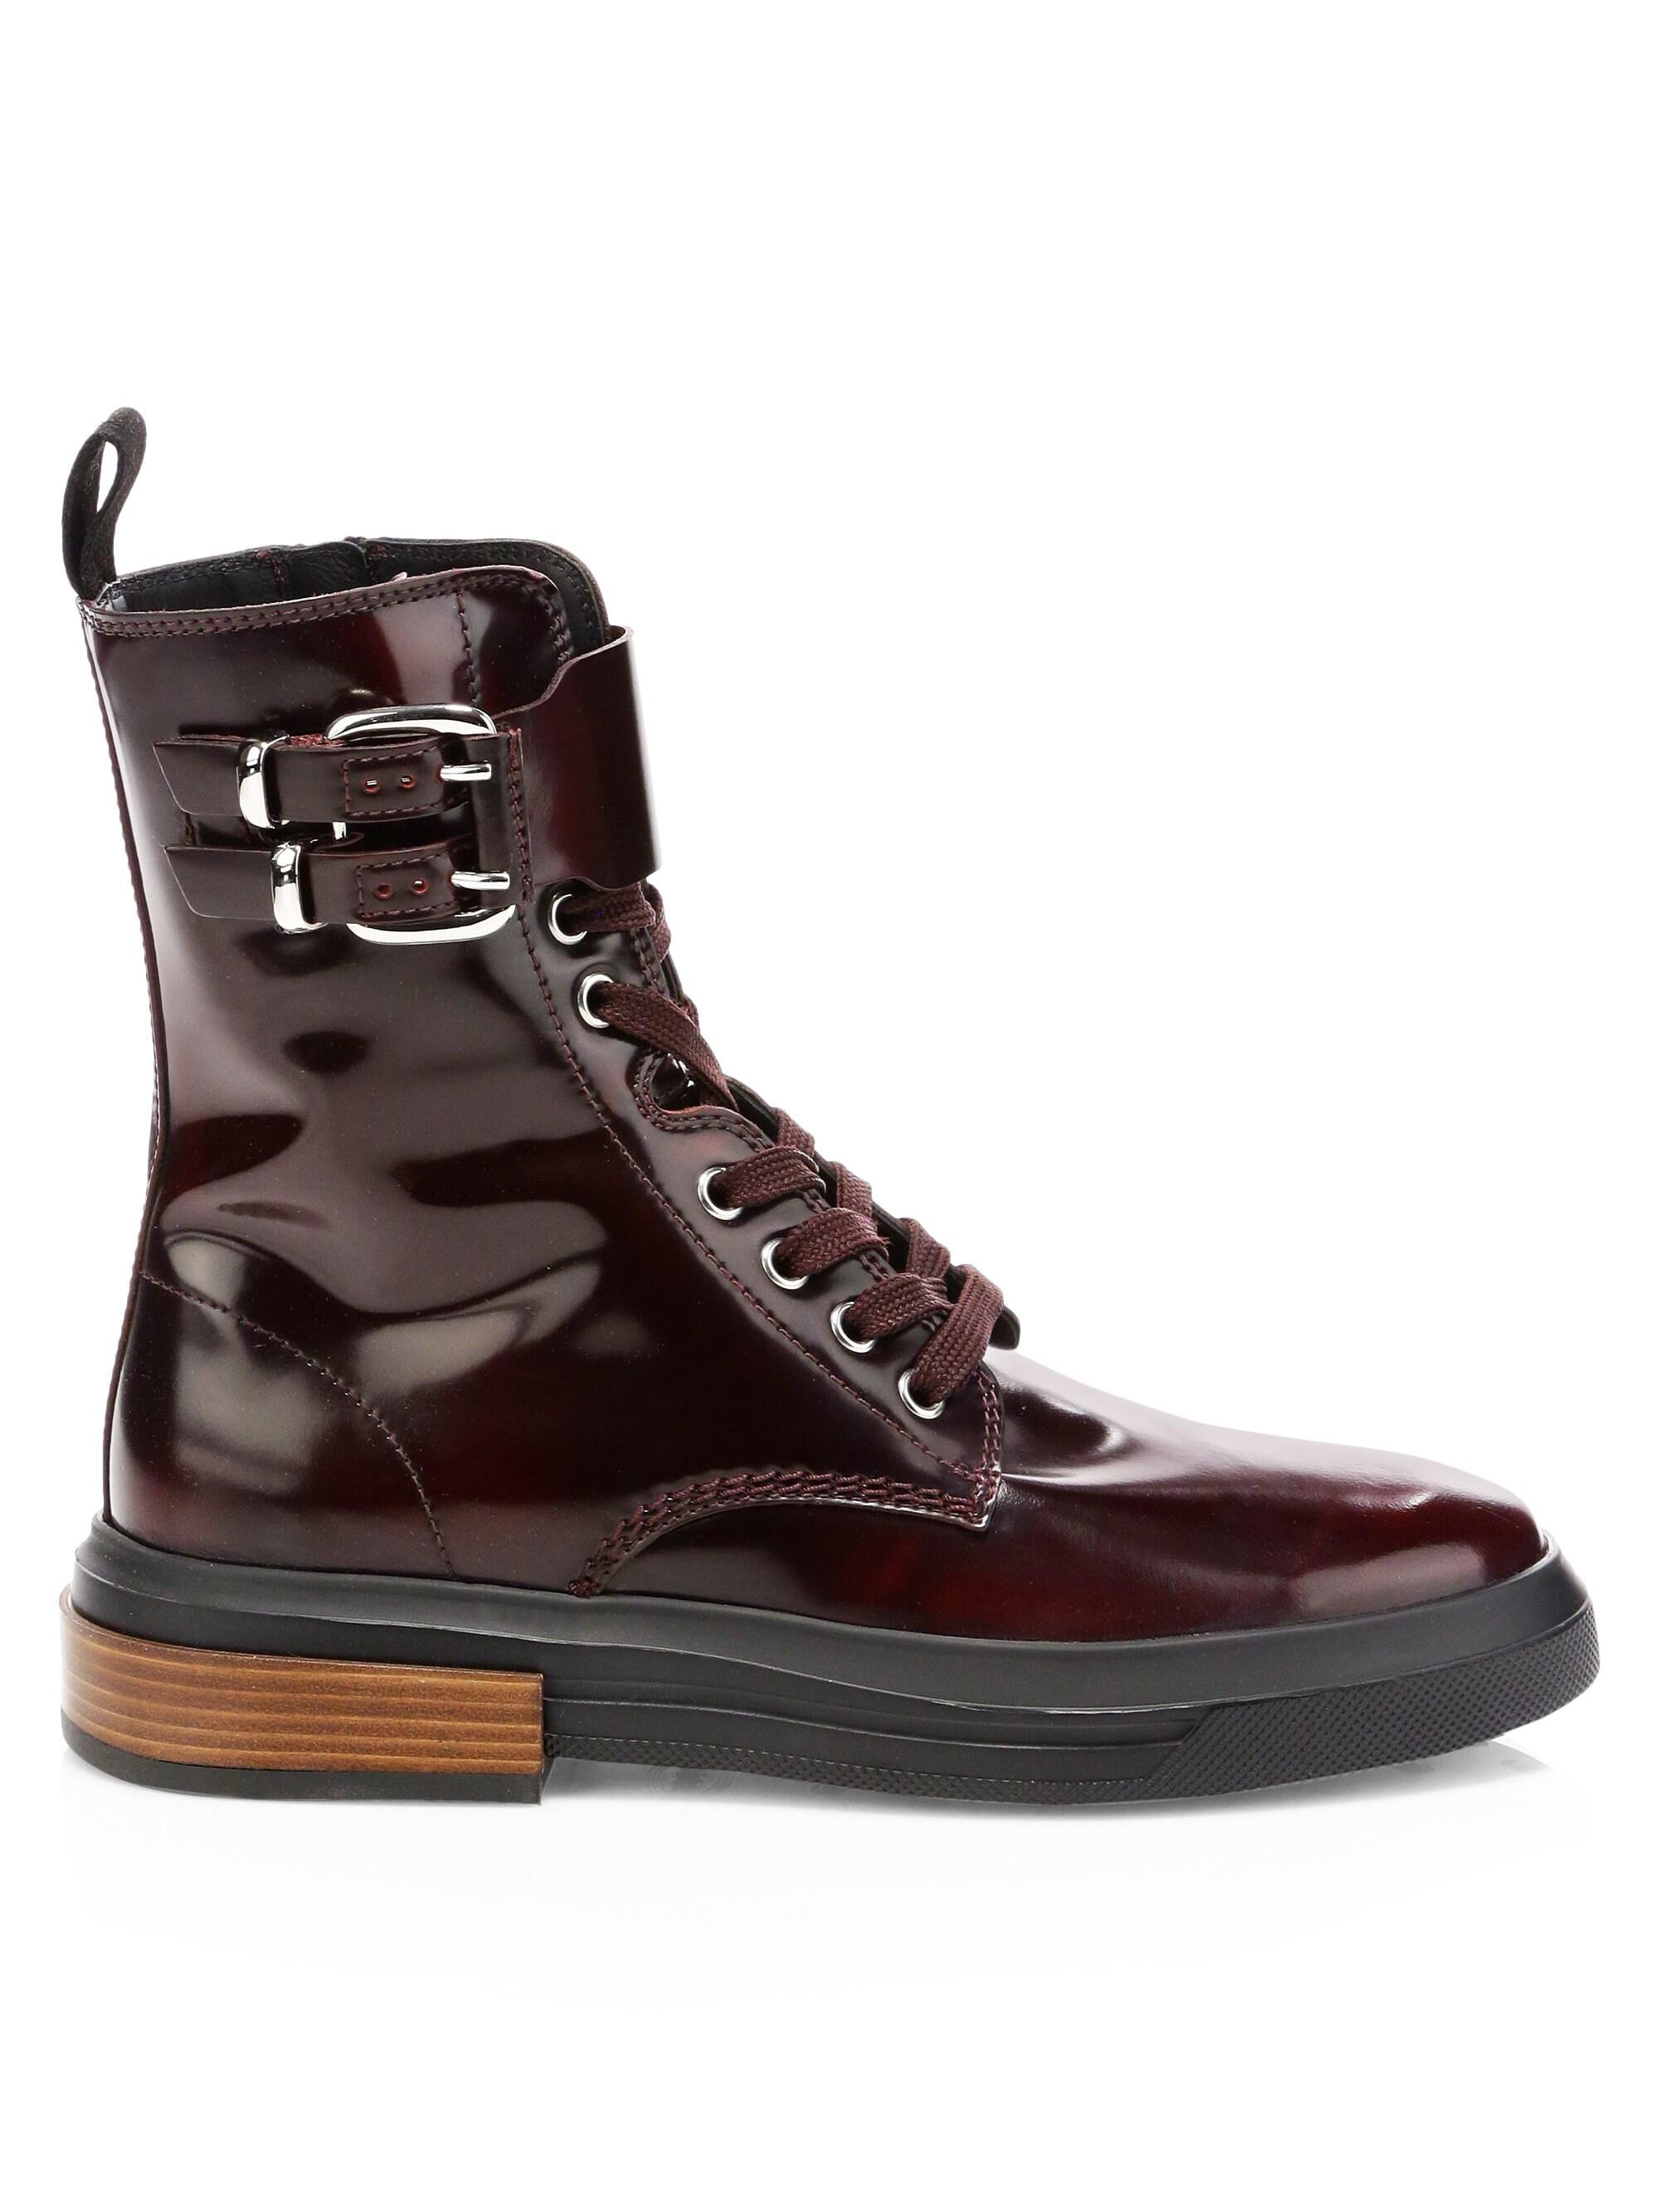 Tod's Women's Leather Combat Boots - Burgundy in Brown | Lyst